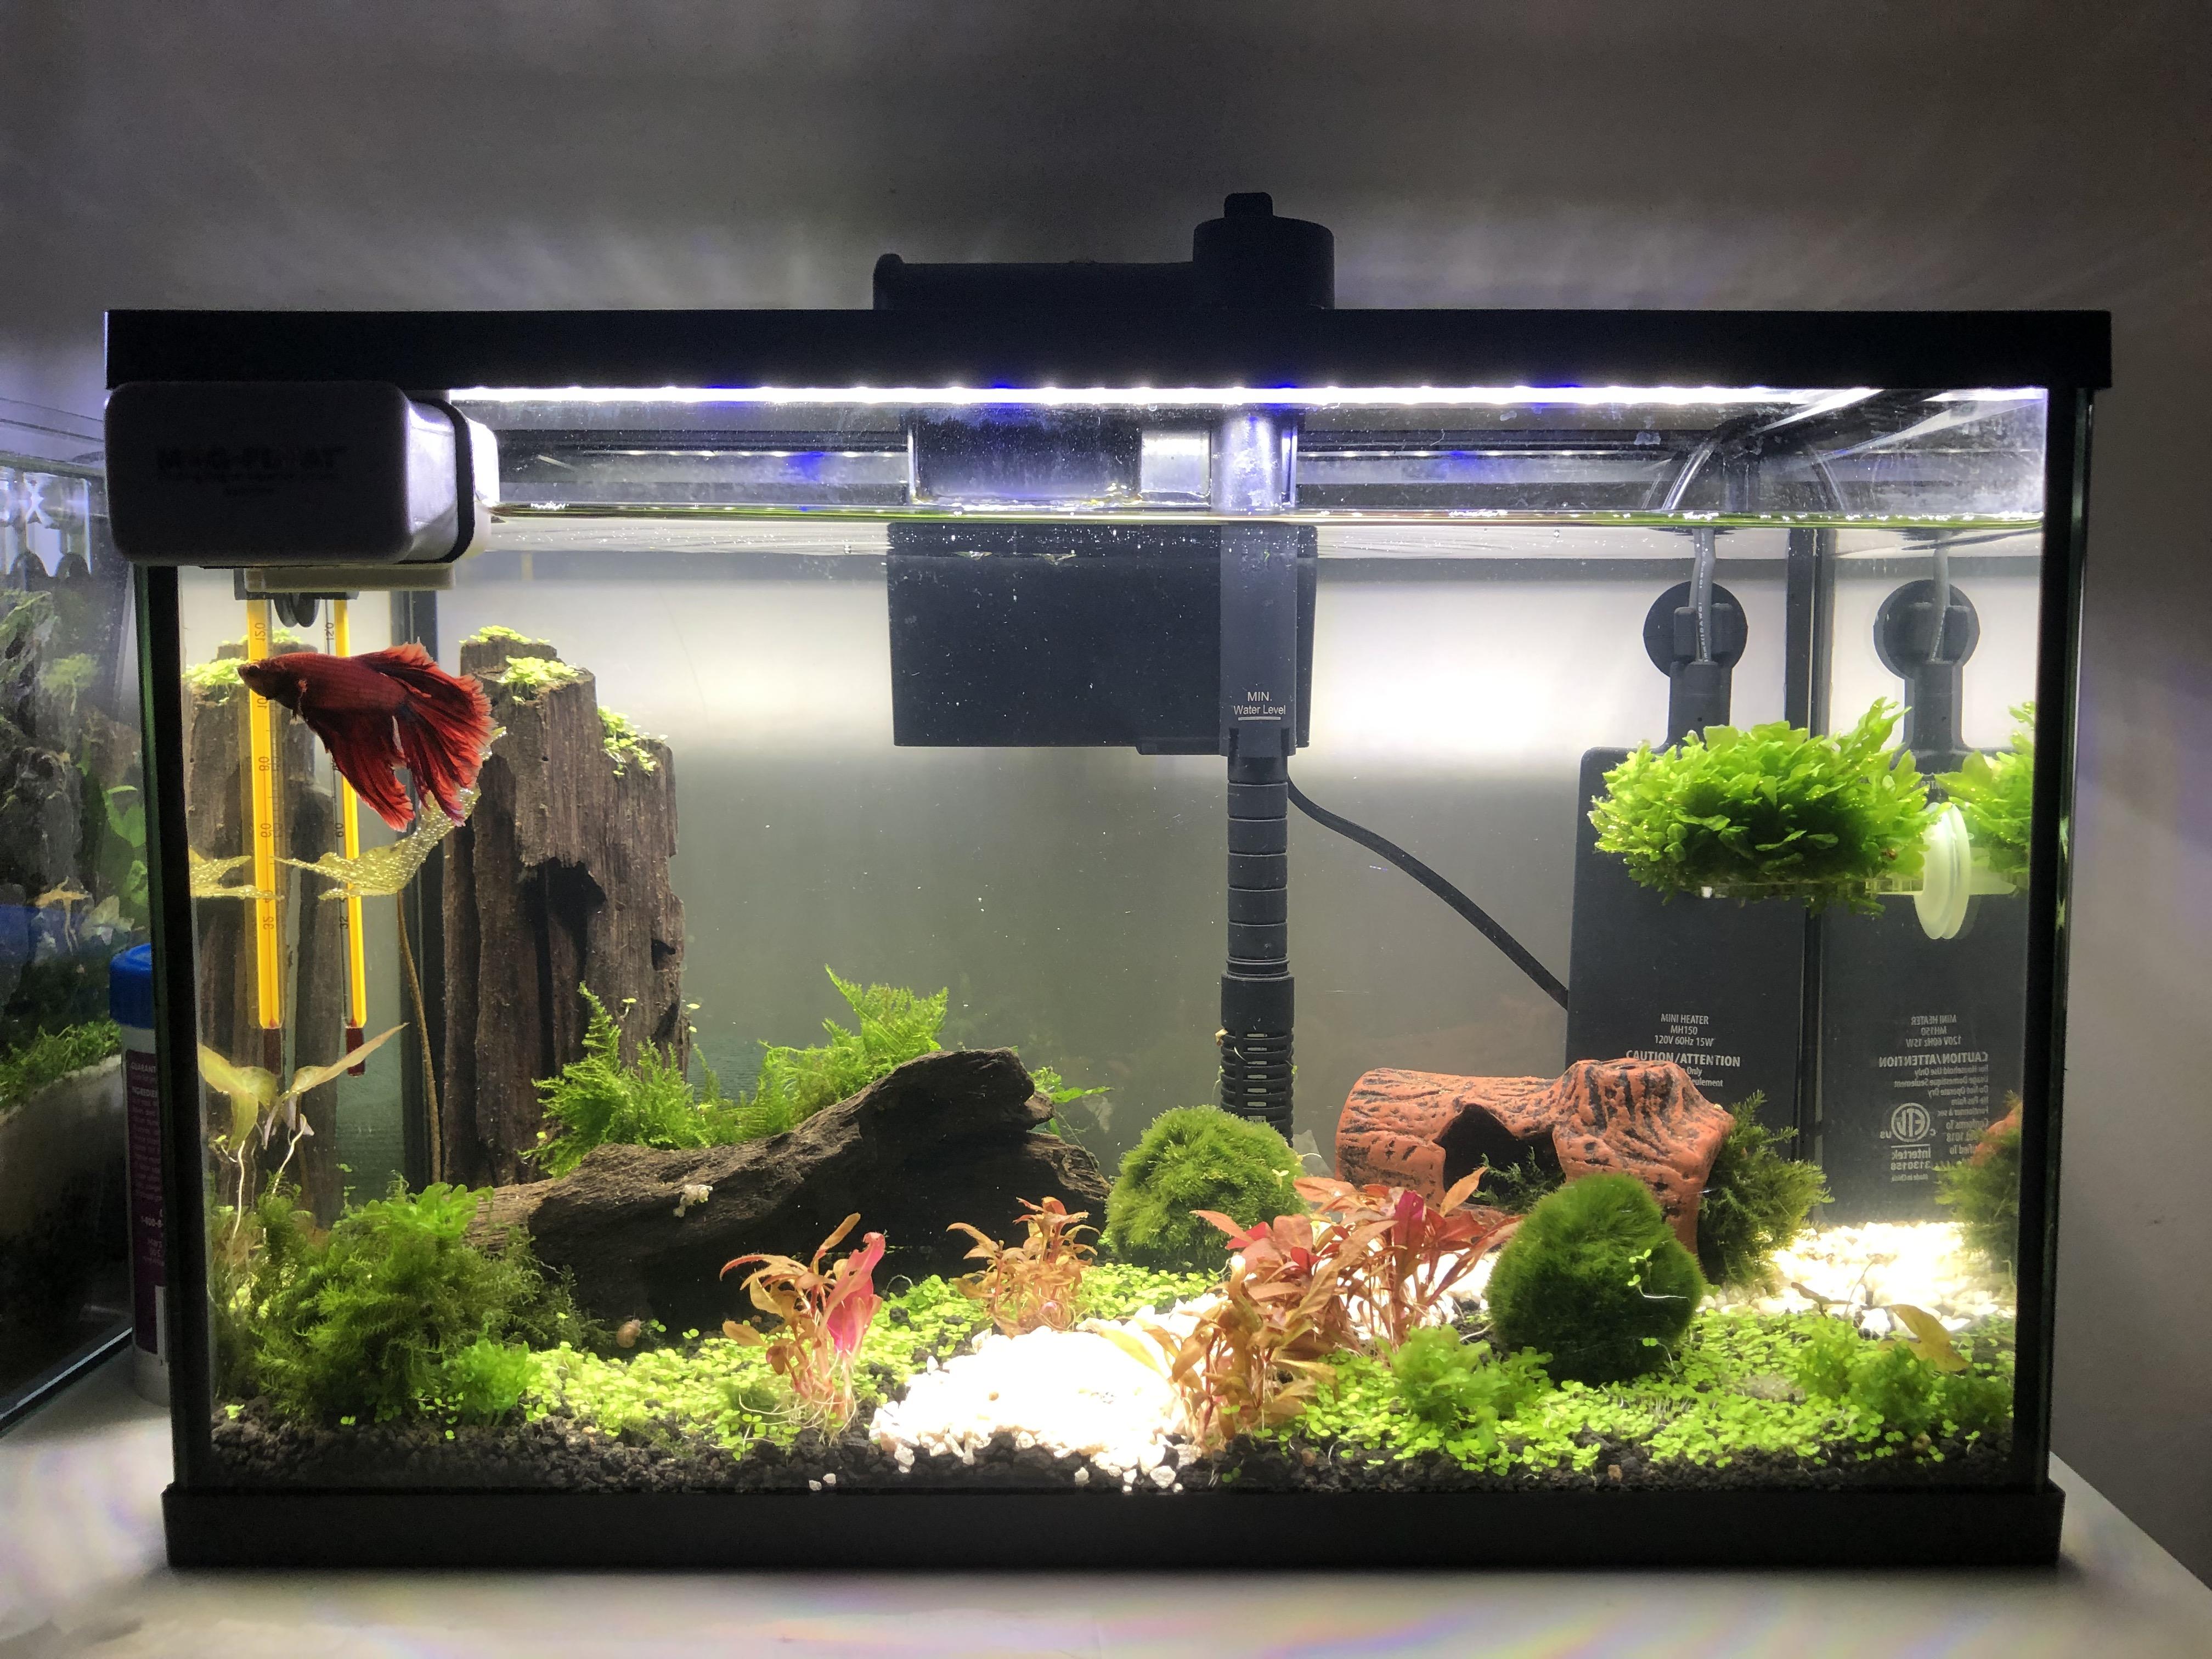 Well-set Betta fish tank with proper size, temperature, filtration, and decor